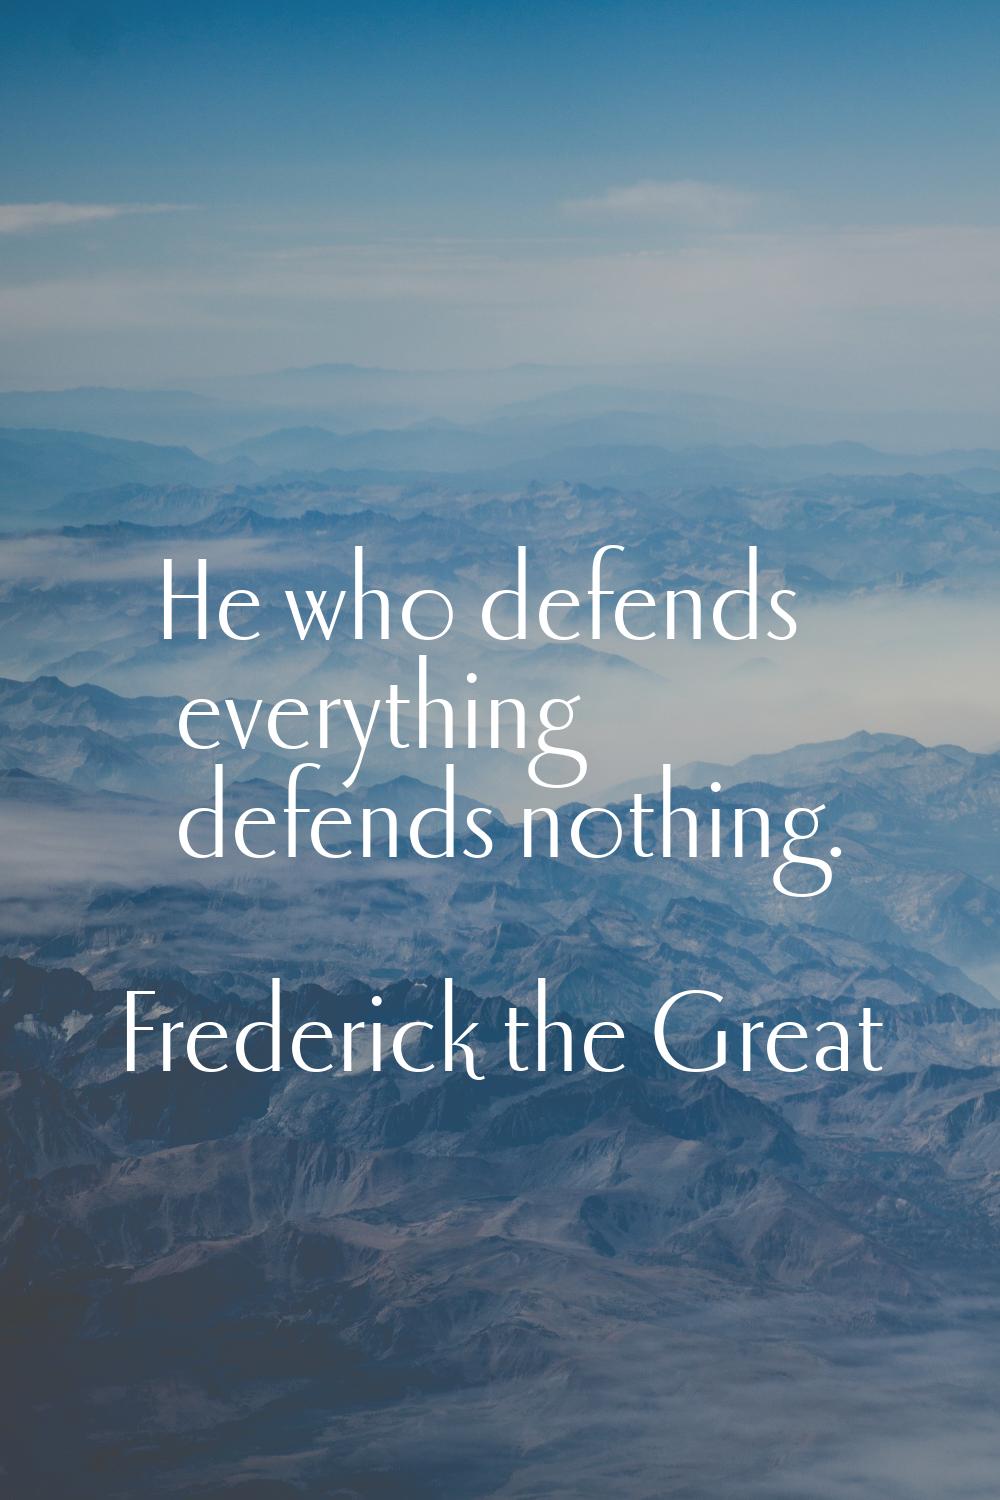 He who defends everything defends nothing.